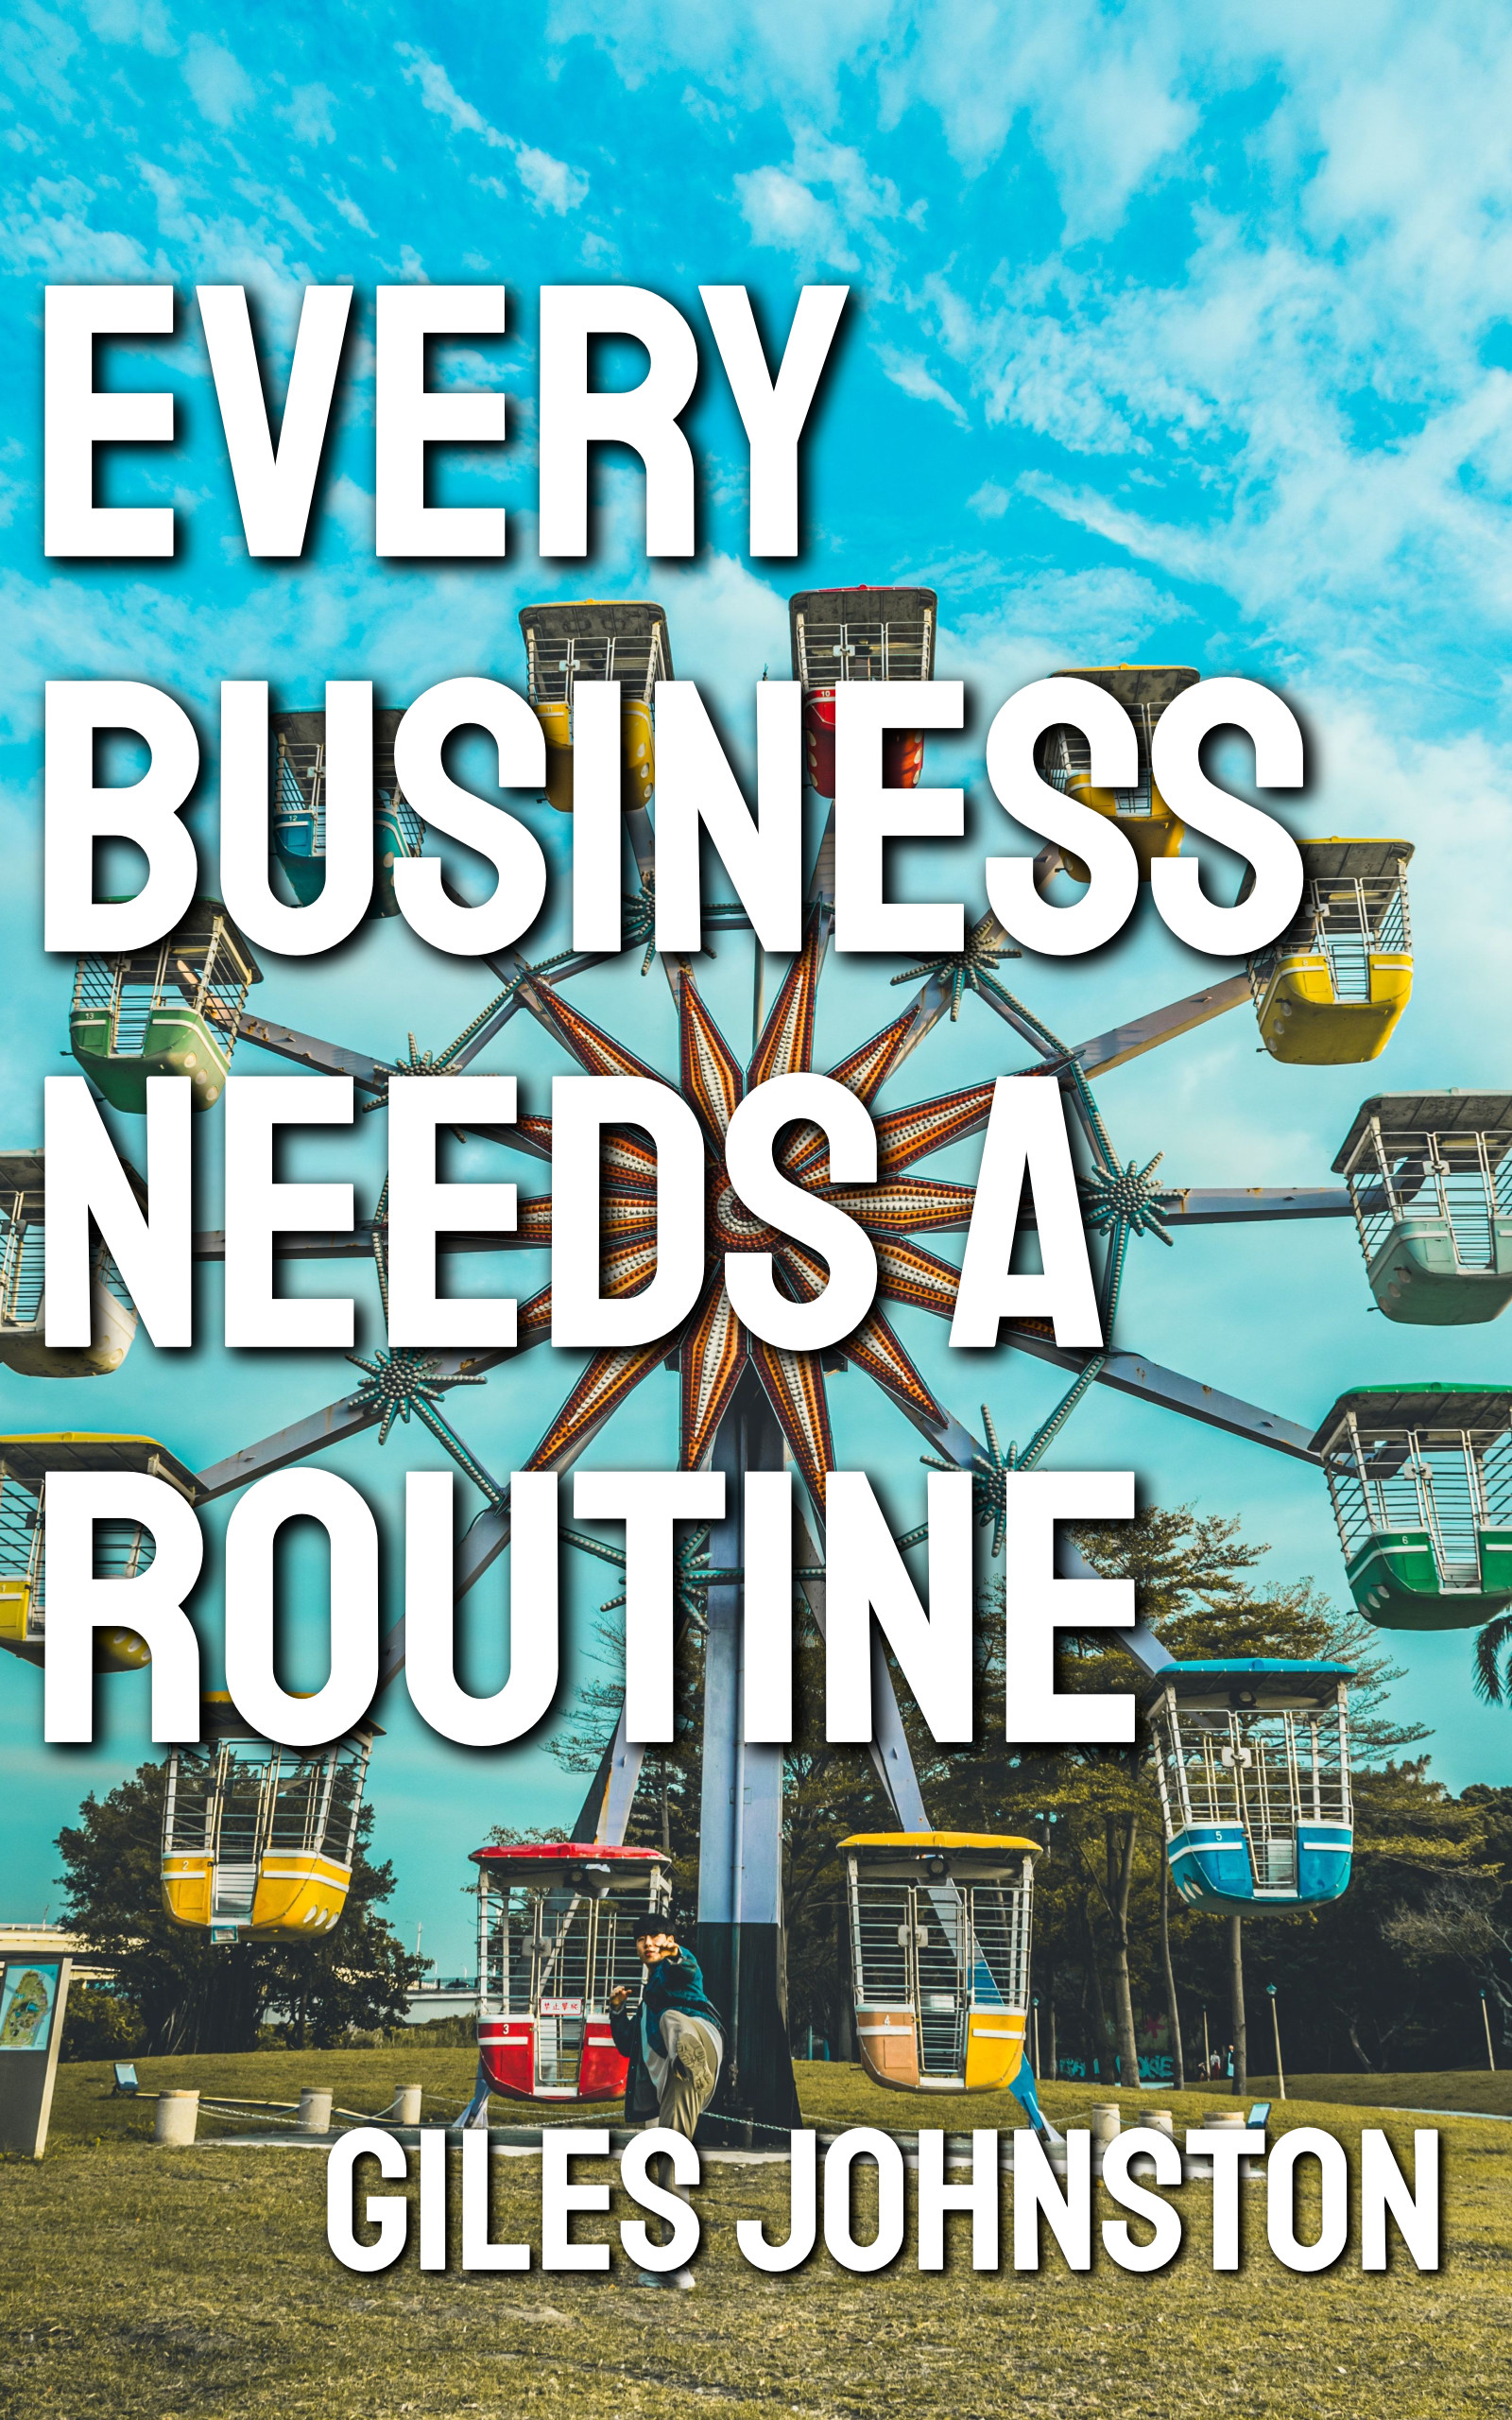 Business routines – free book